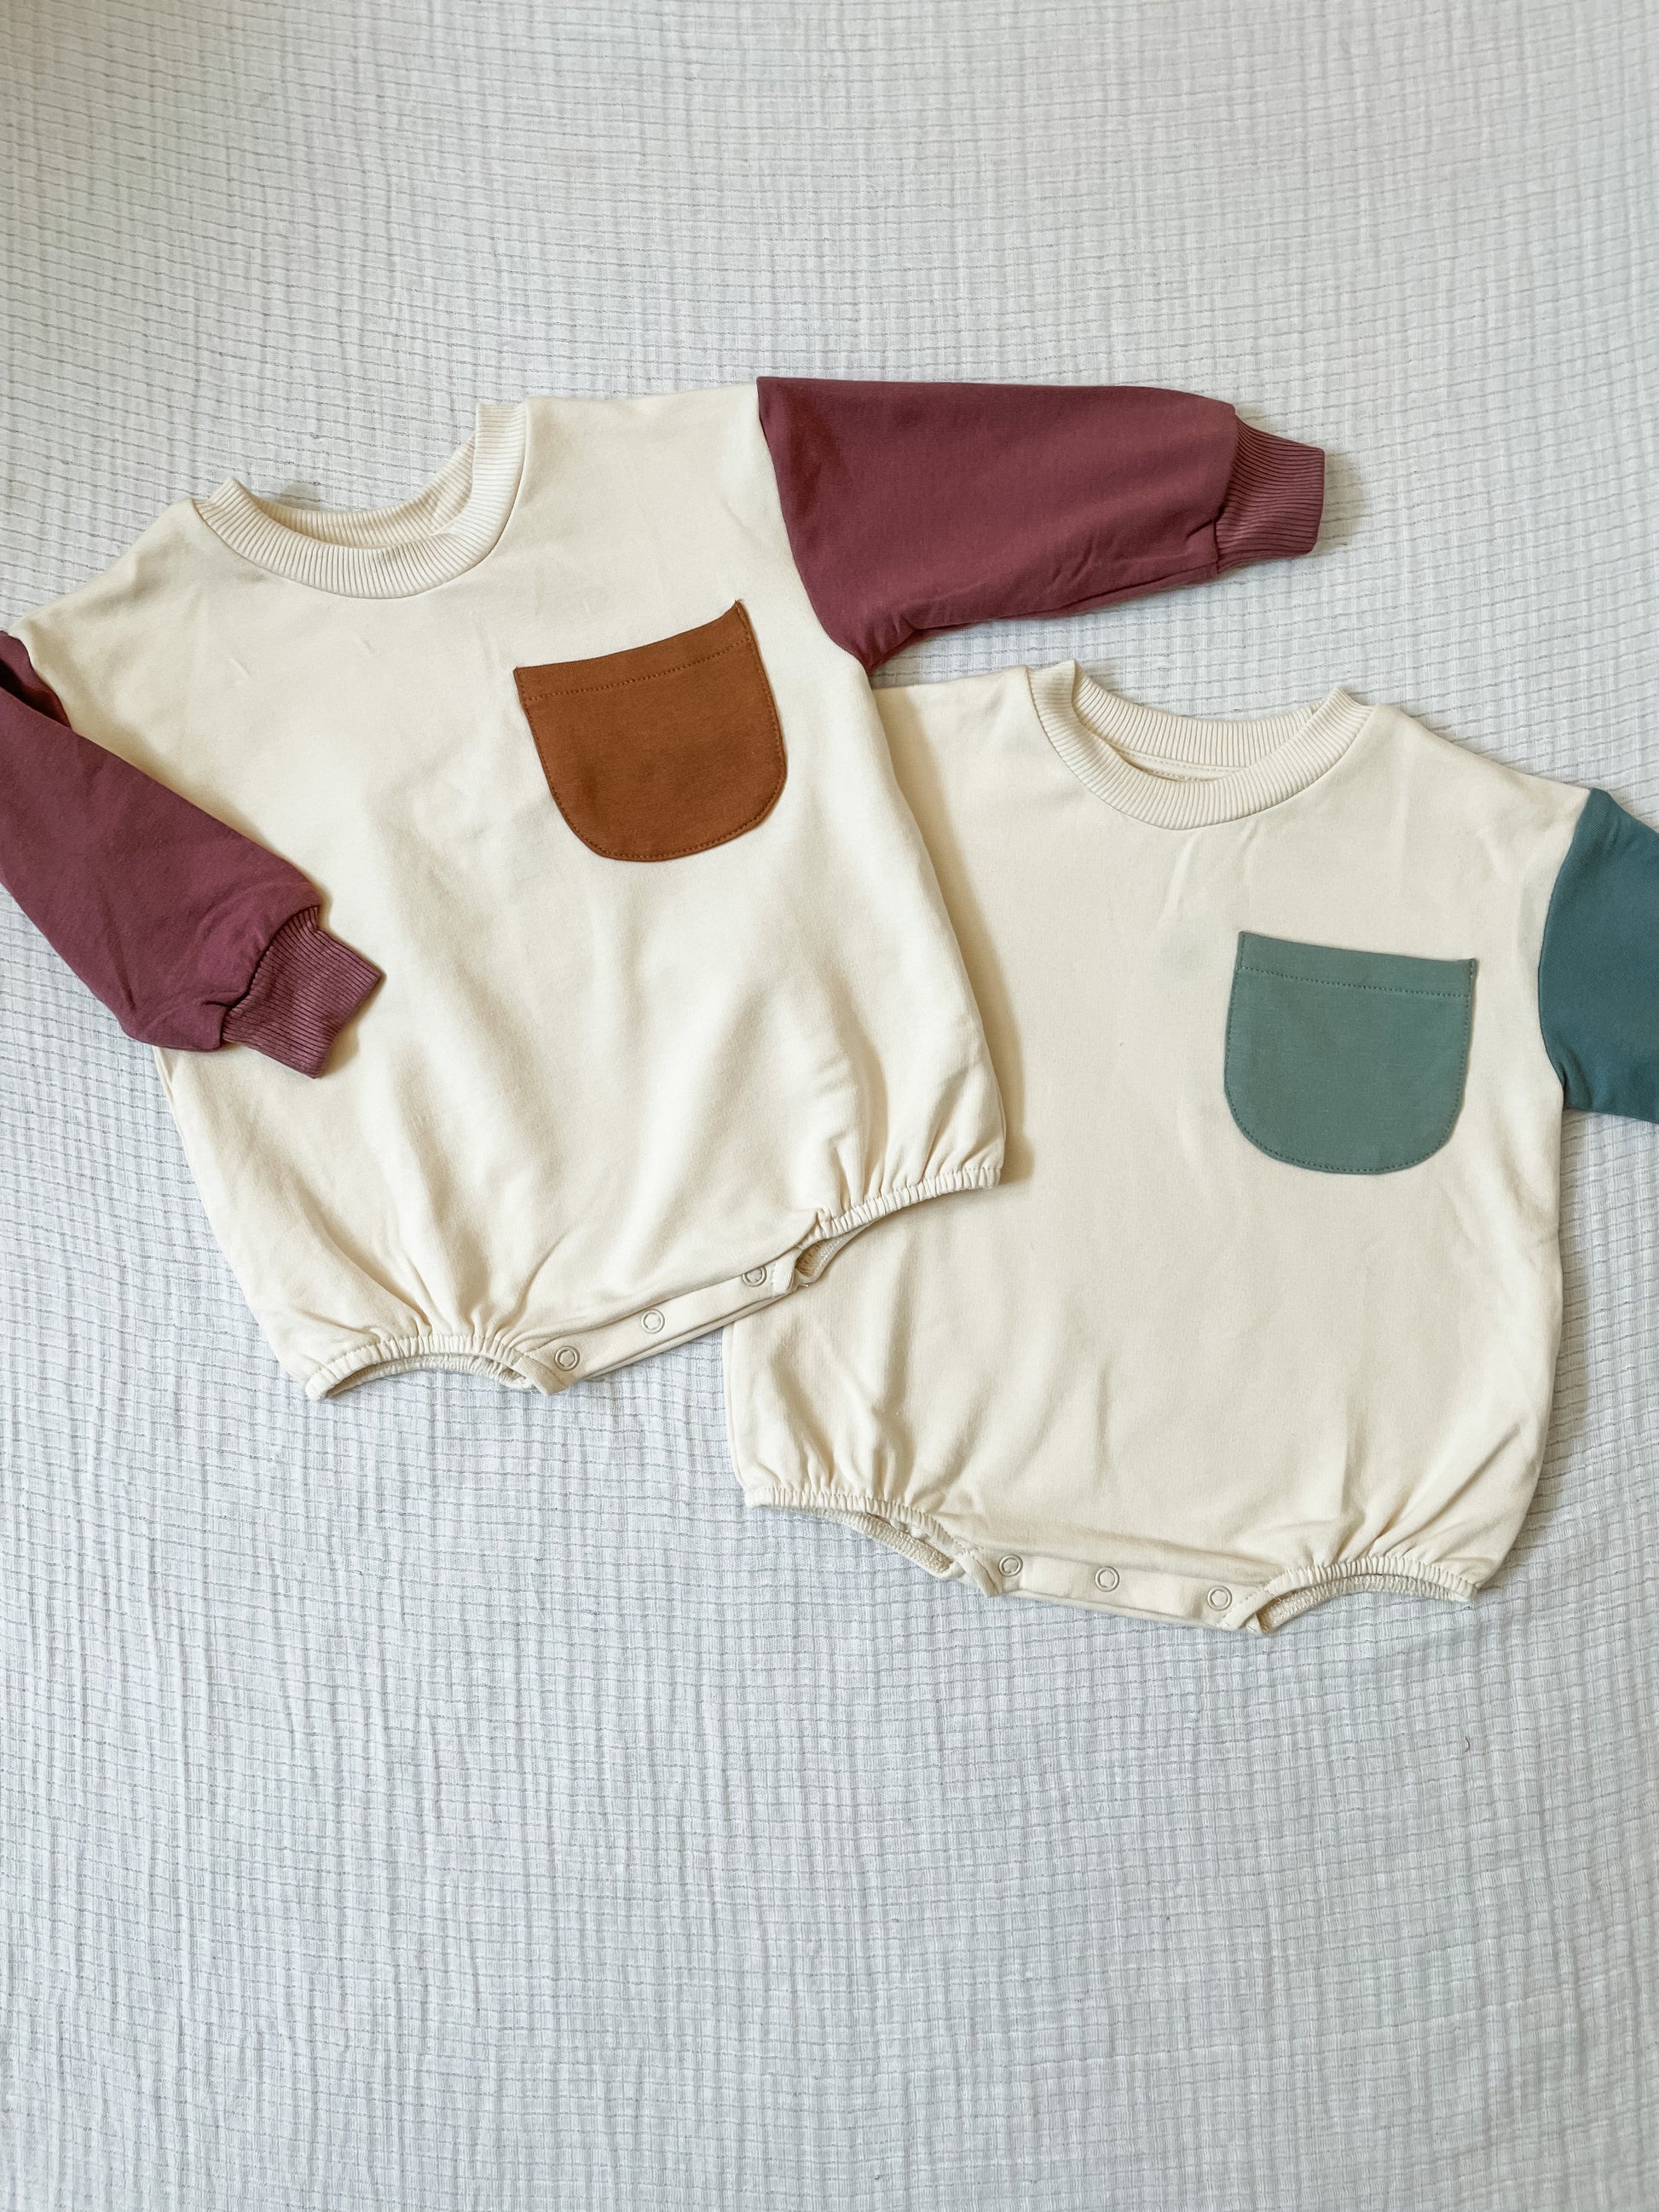 covelKai Colorblock Romper - Maroon & Camel - Premium romper from babysprouts clothing company - Just $28! Shop now at covel0-12, 12-24, baby, baby sweater, bodysuit, boys, Fairecovel